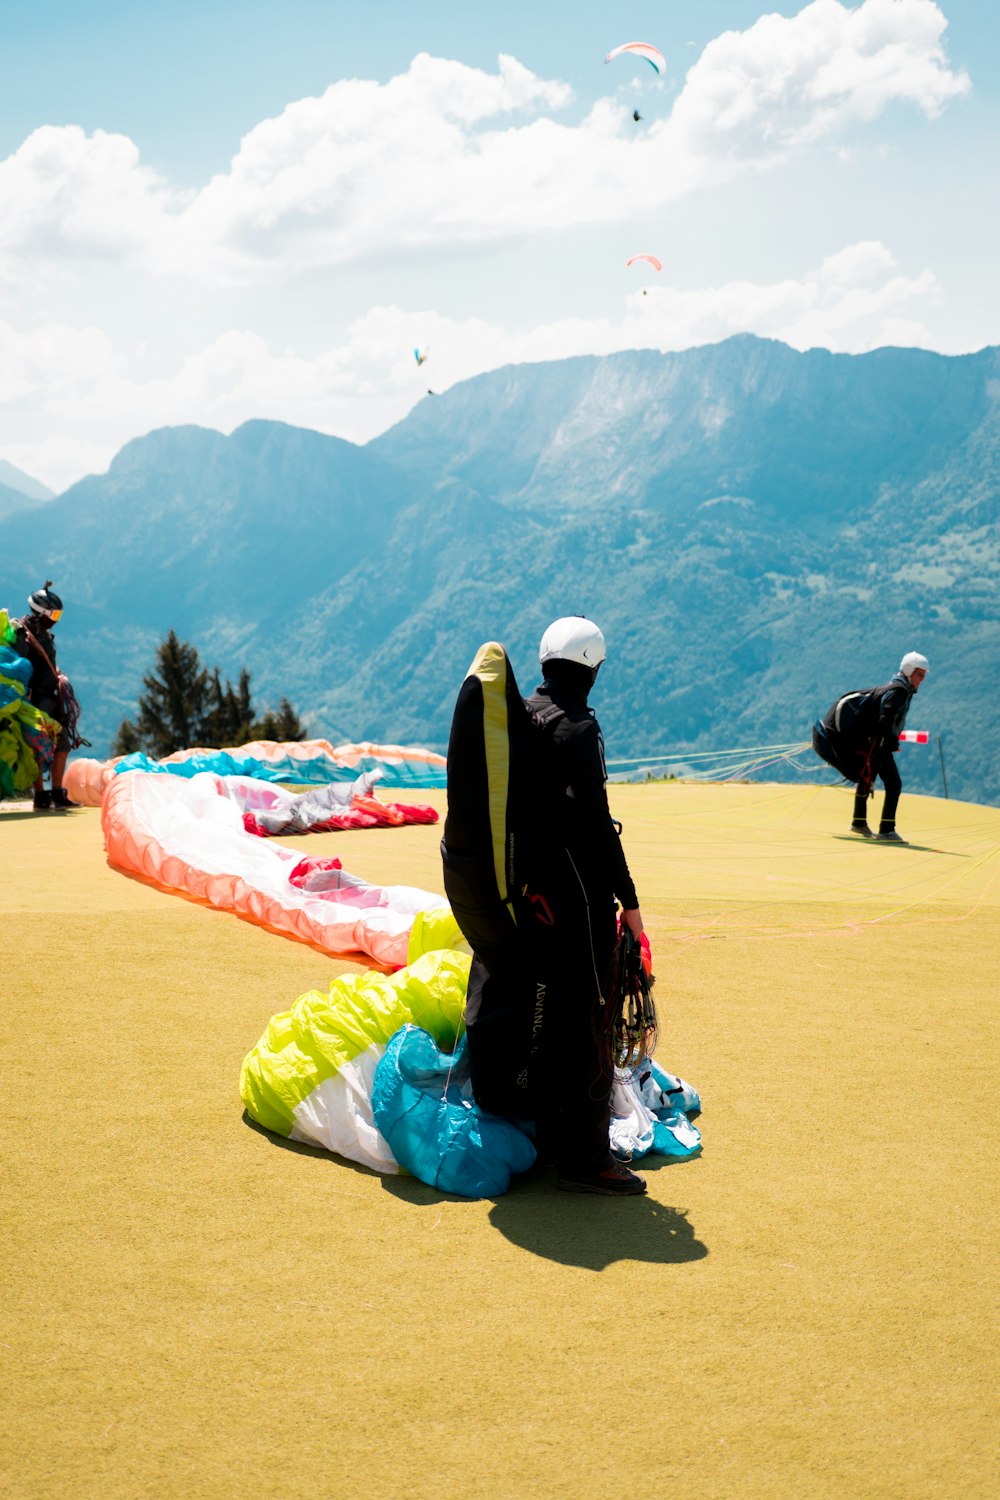 paraglider buckled in black, yellow, and blue parachute while standing on yellow hill near man preparing to jump overlooking mountain ridges under white cloudy skies at daytime